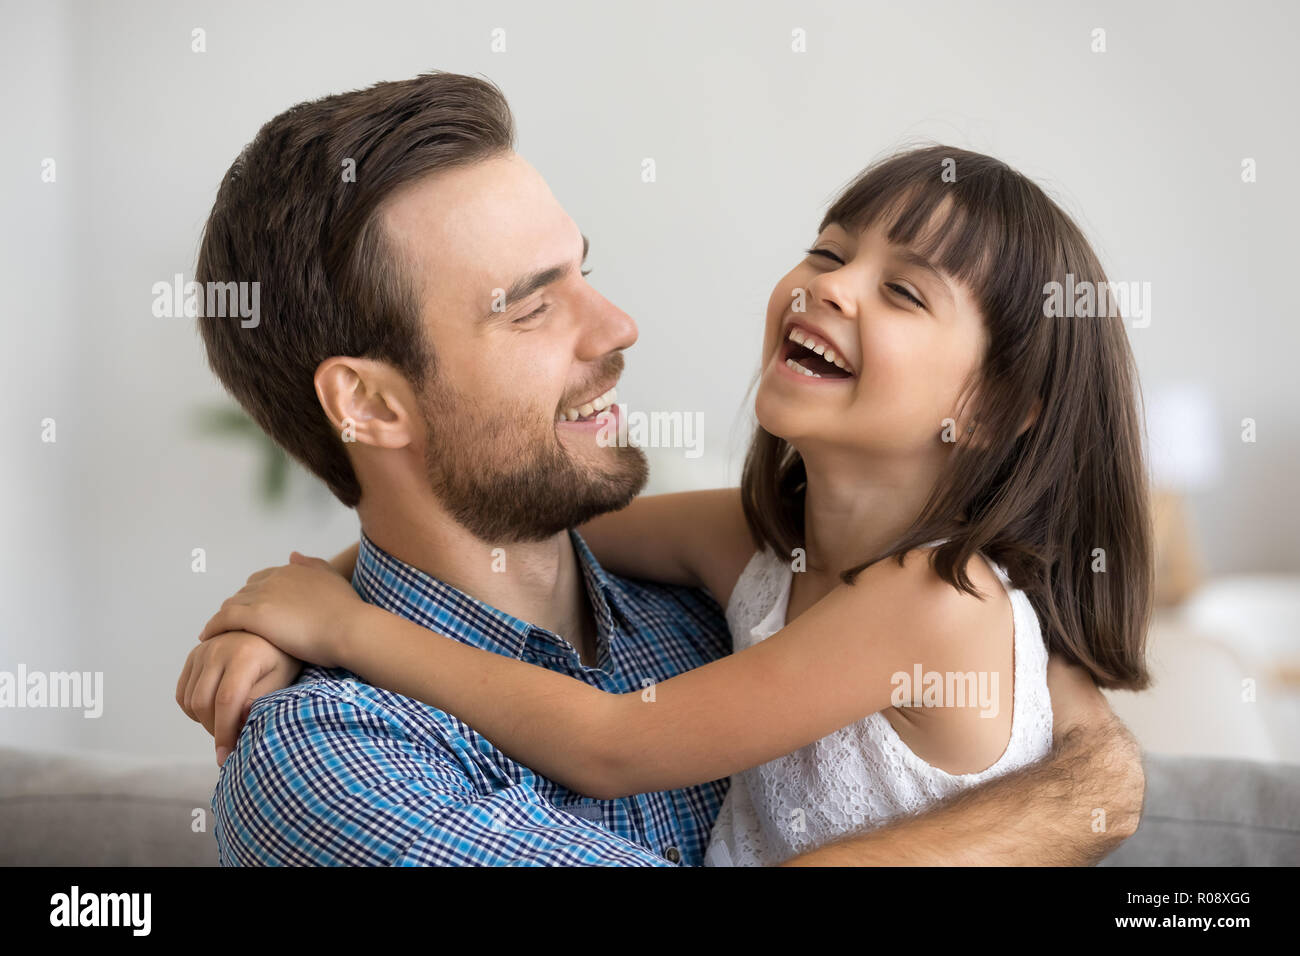 Father and daughter have fun smiling and laughing at home Stock Photo